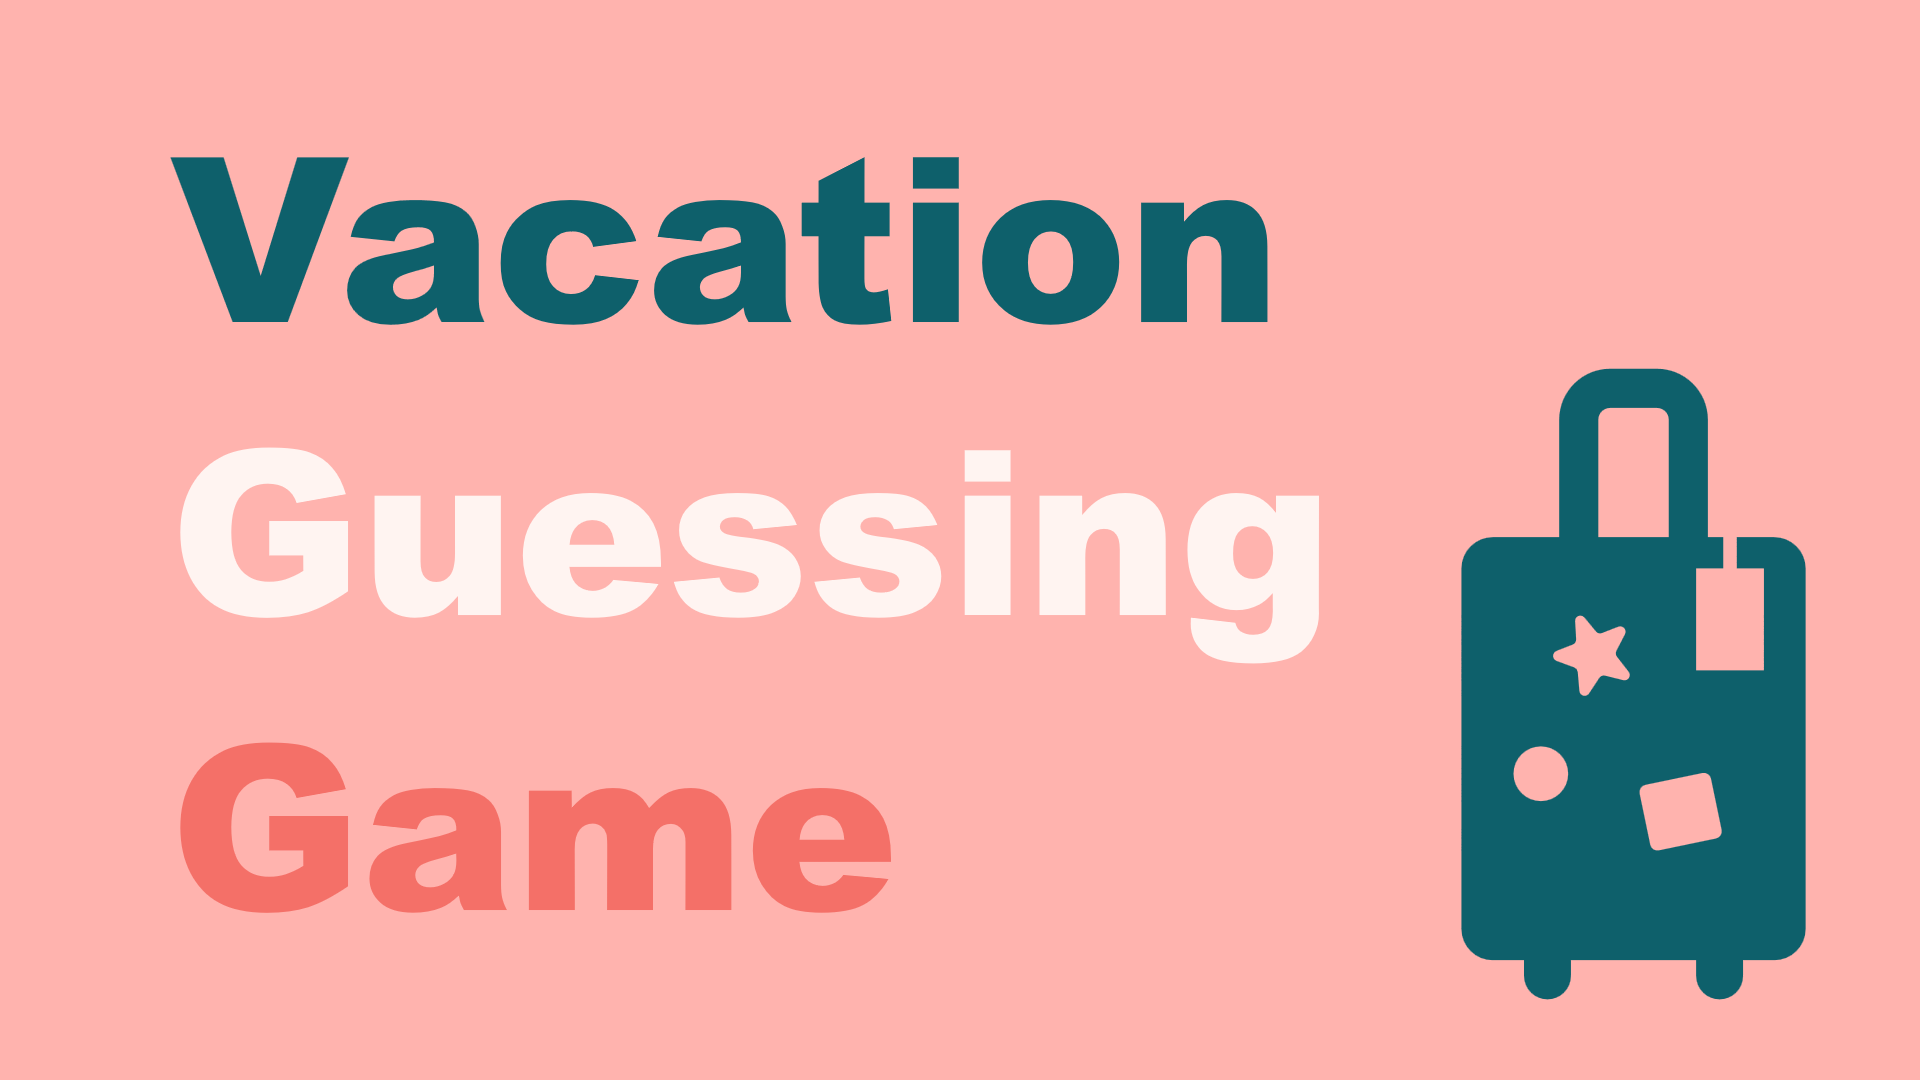 Vacation Guessing Game